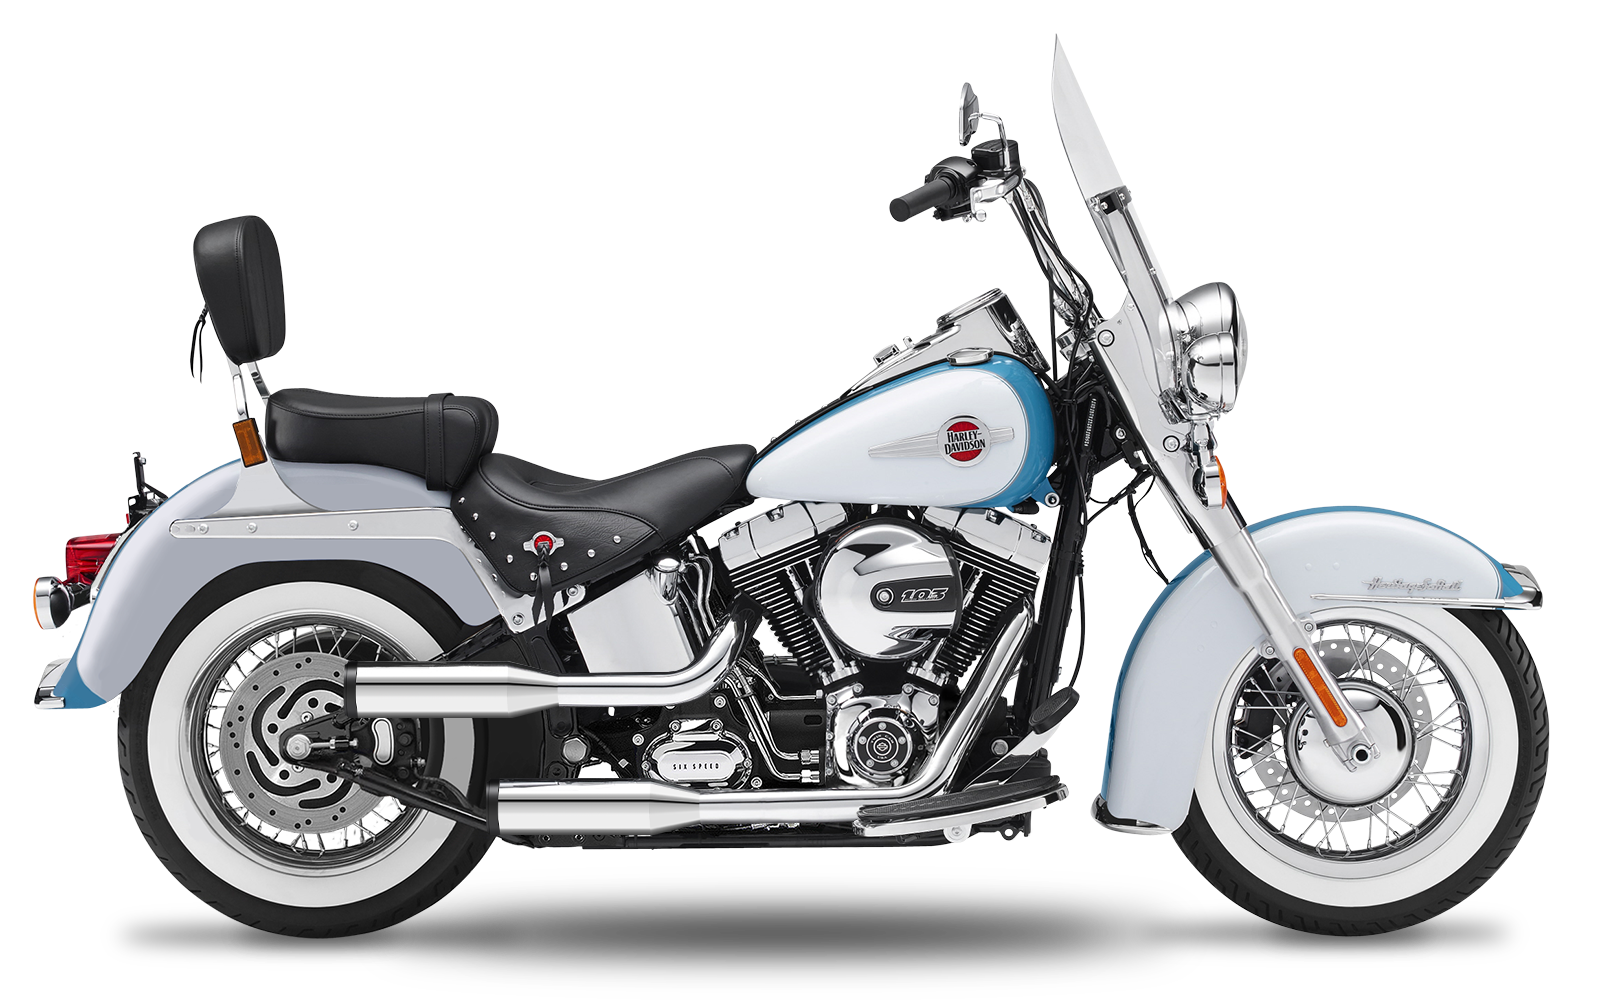 CRUISER/SOFTAIL - Heritage - TC88 - 2000-2006 - Complete systems adjustable